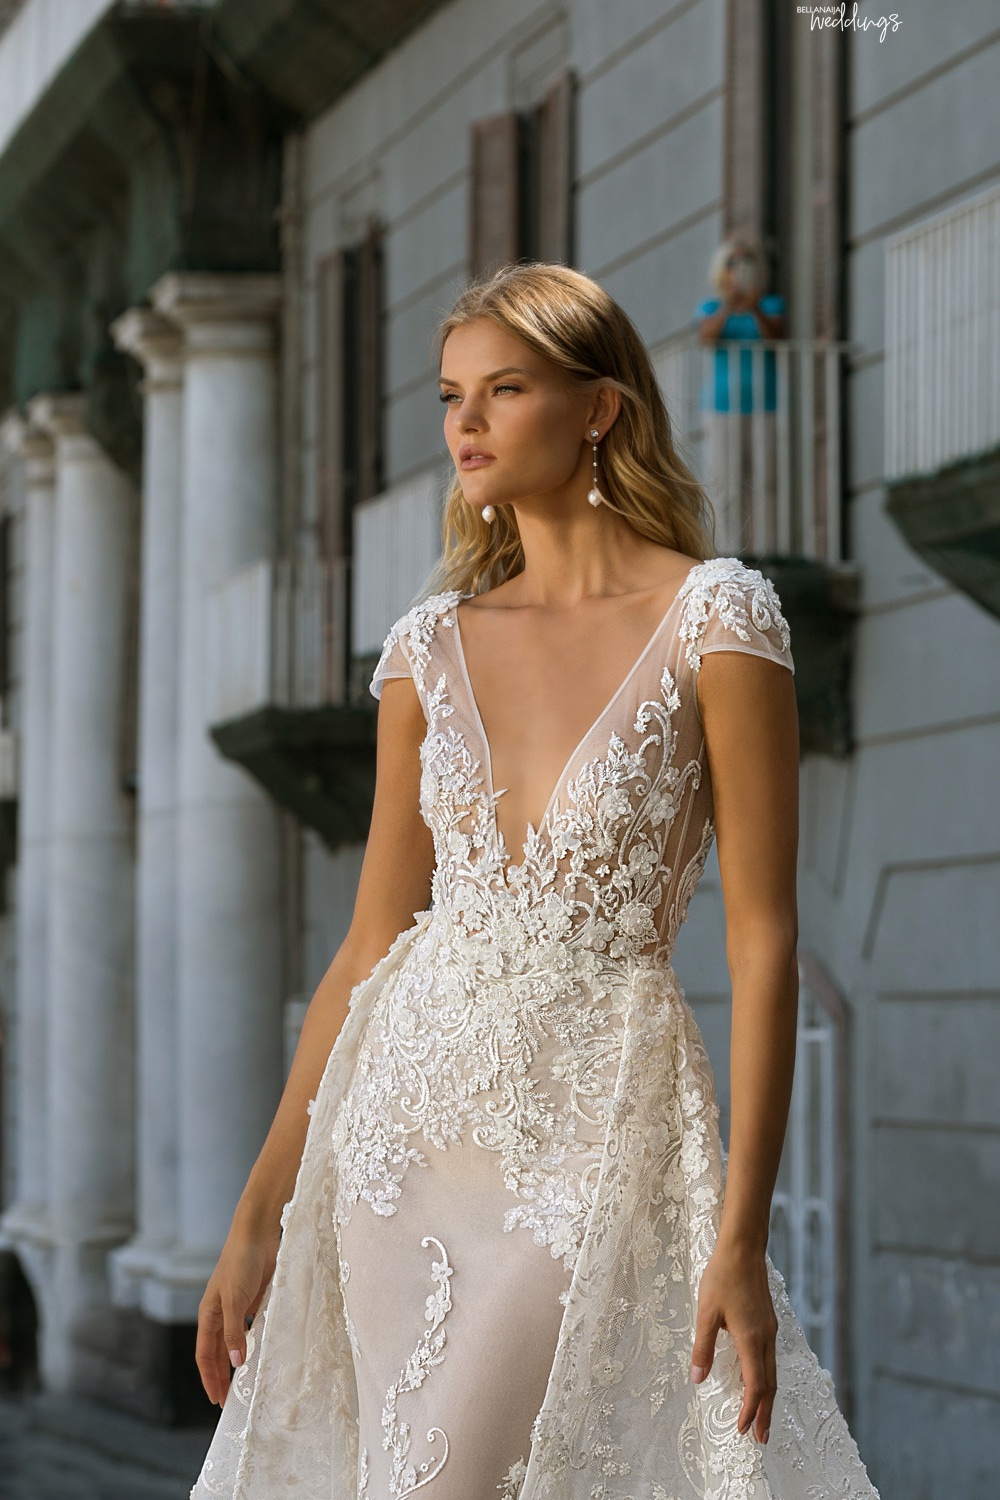 BN Bridal: The Fall 2020 Napoli Collection by Berta